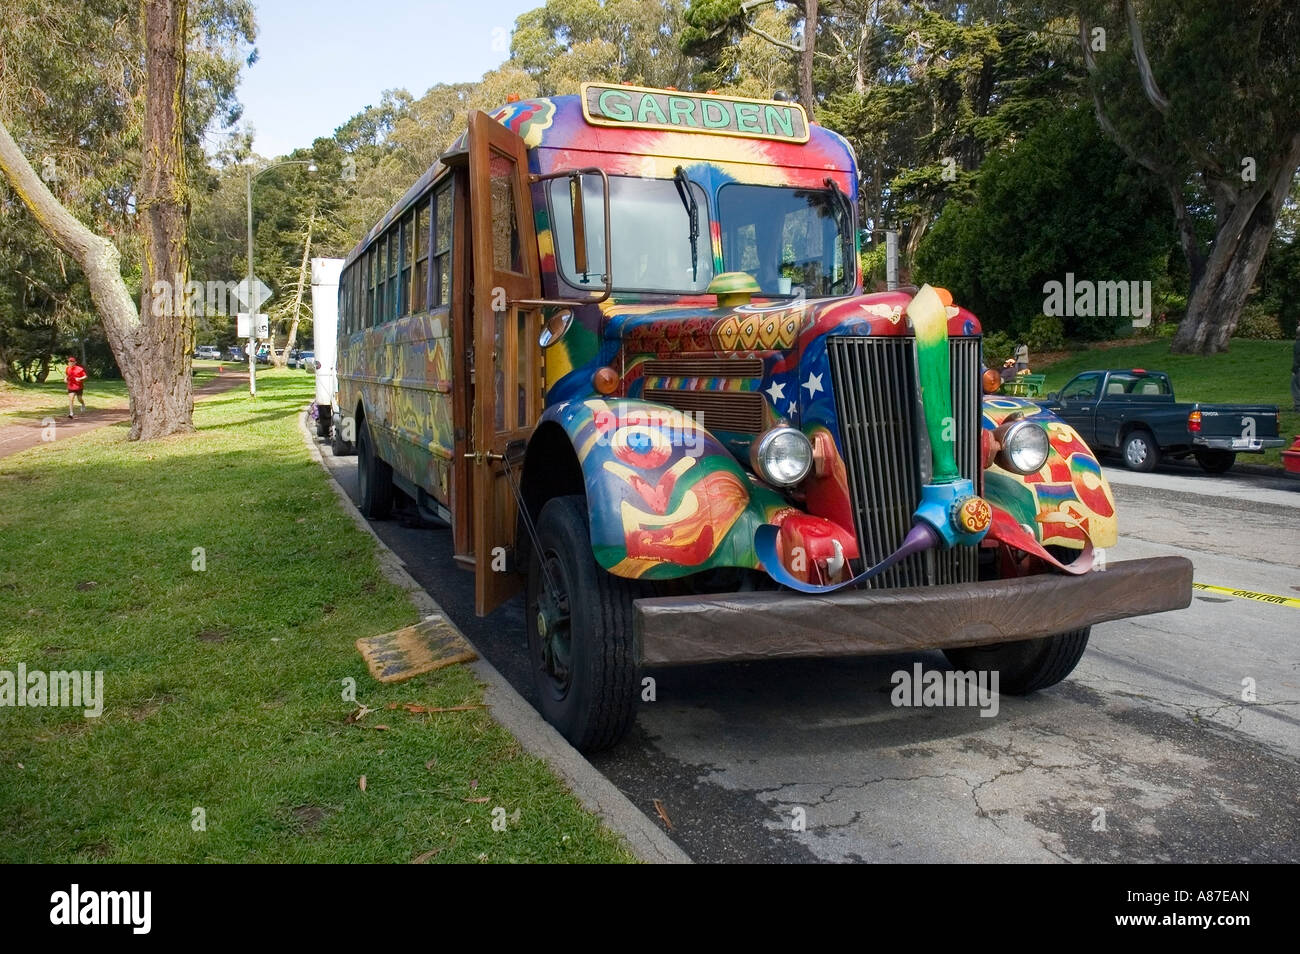 Hippie bus painted in wild psychedelic colors Stock Photo